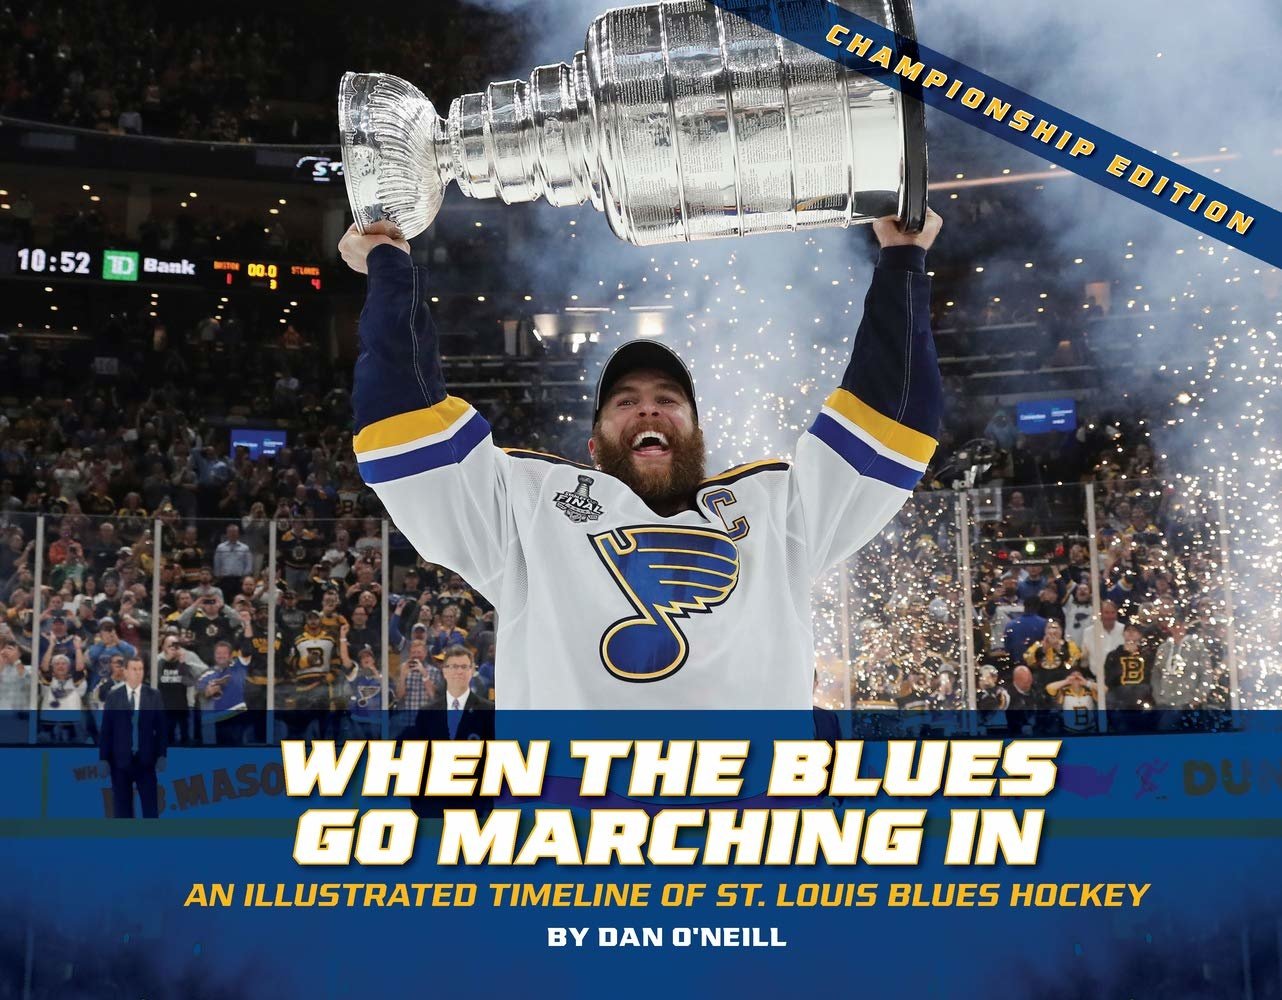 Championship Edition: When The Blues Go Marching In: An Illustrated Timeline Of St. Louis Blues Hockey